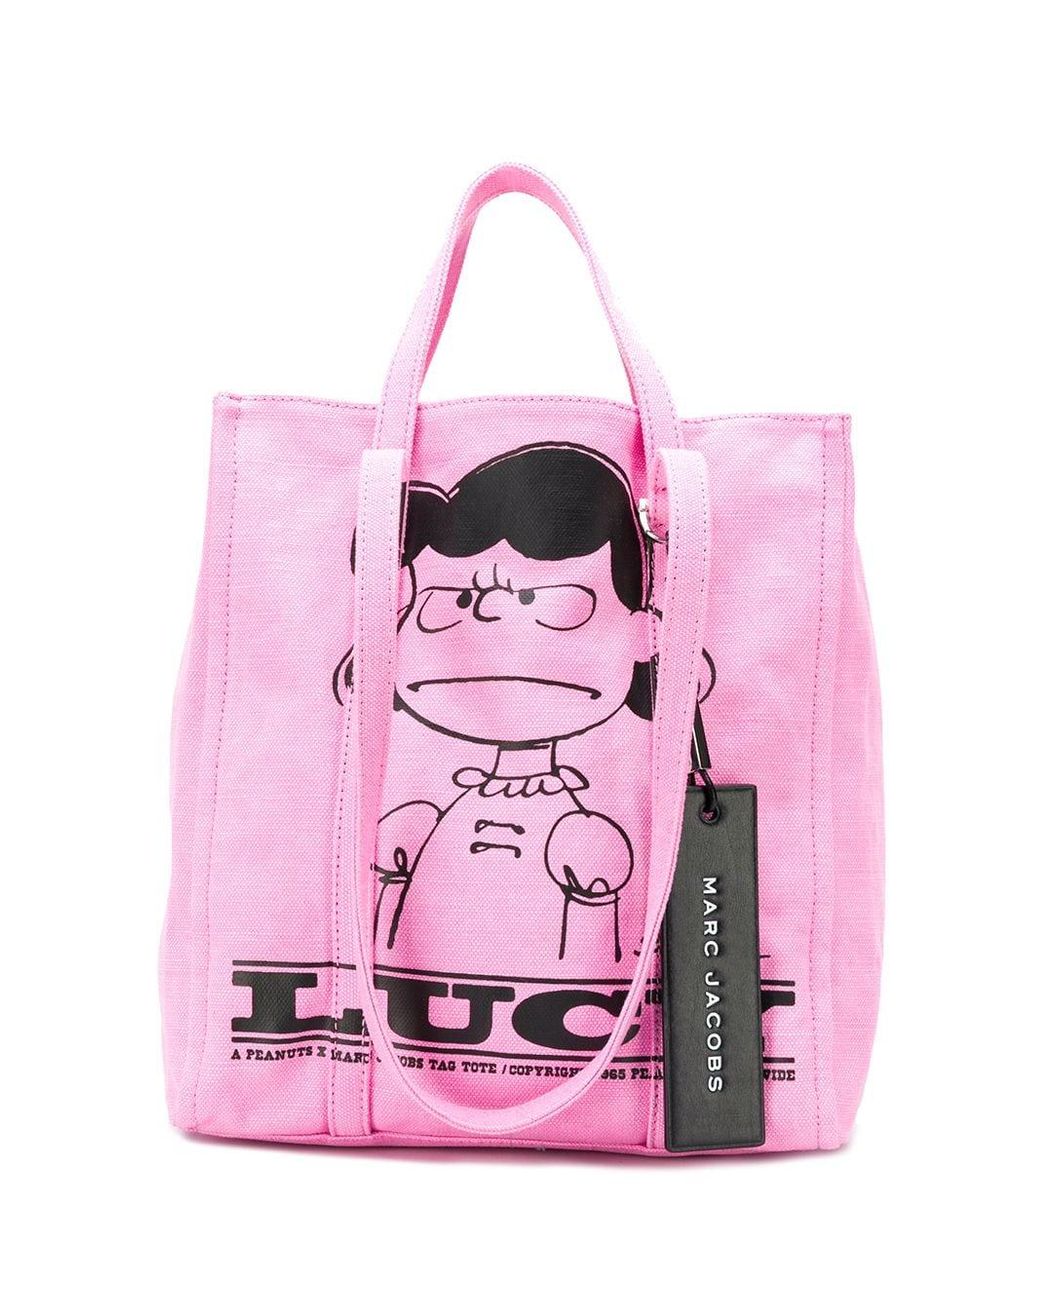 Marc Jacobs X Peanuts Lucy The Tag Tote in Pink | Lyst